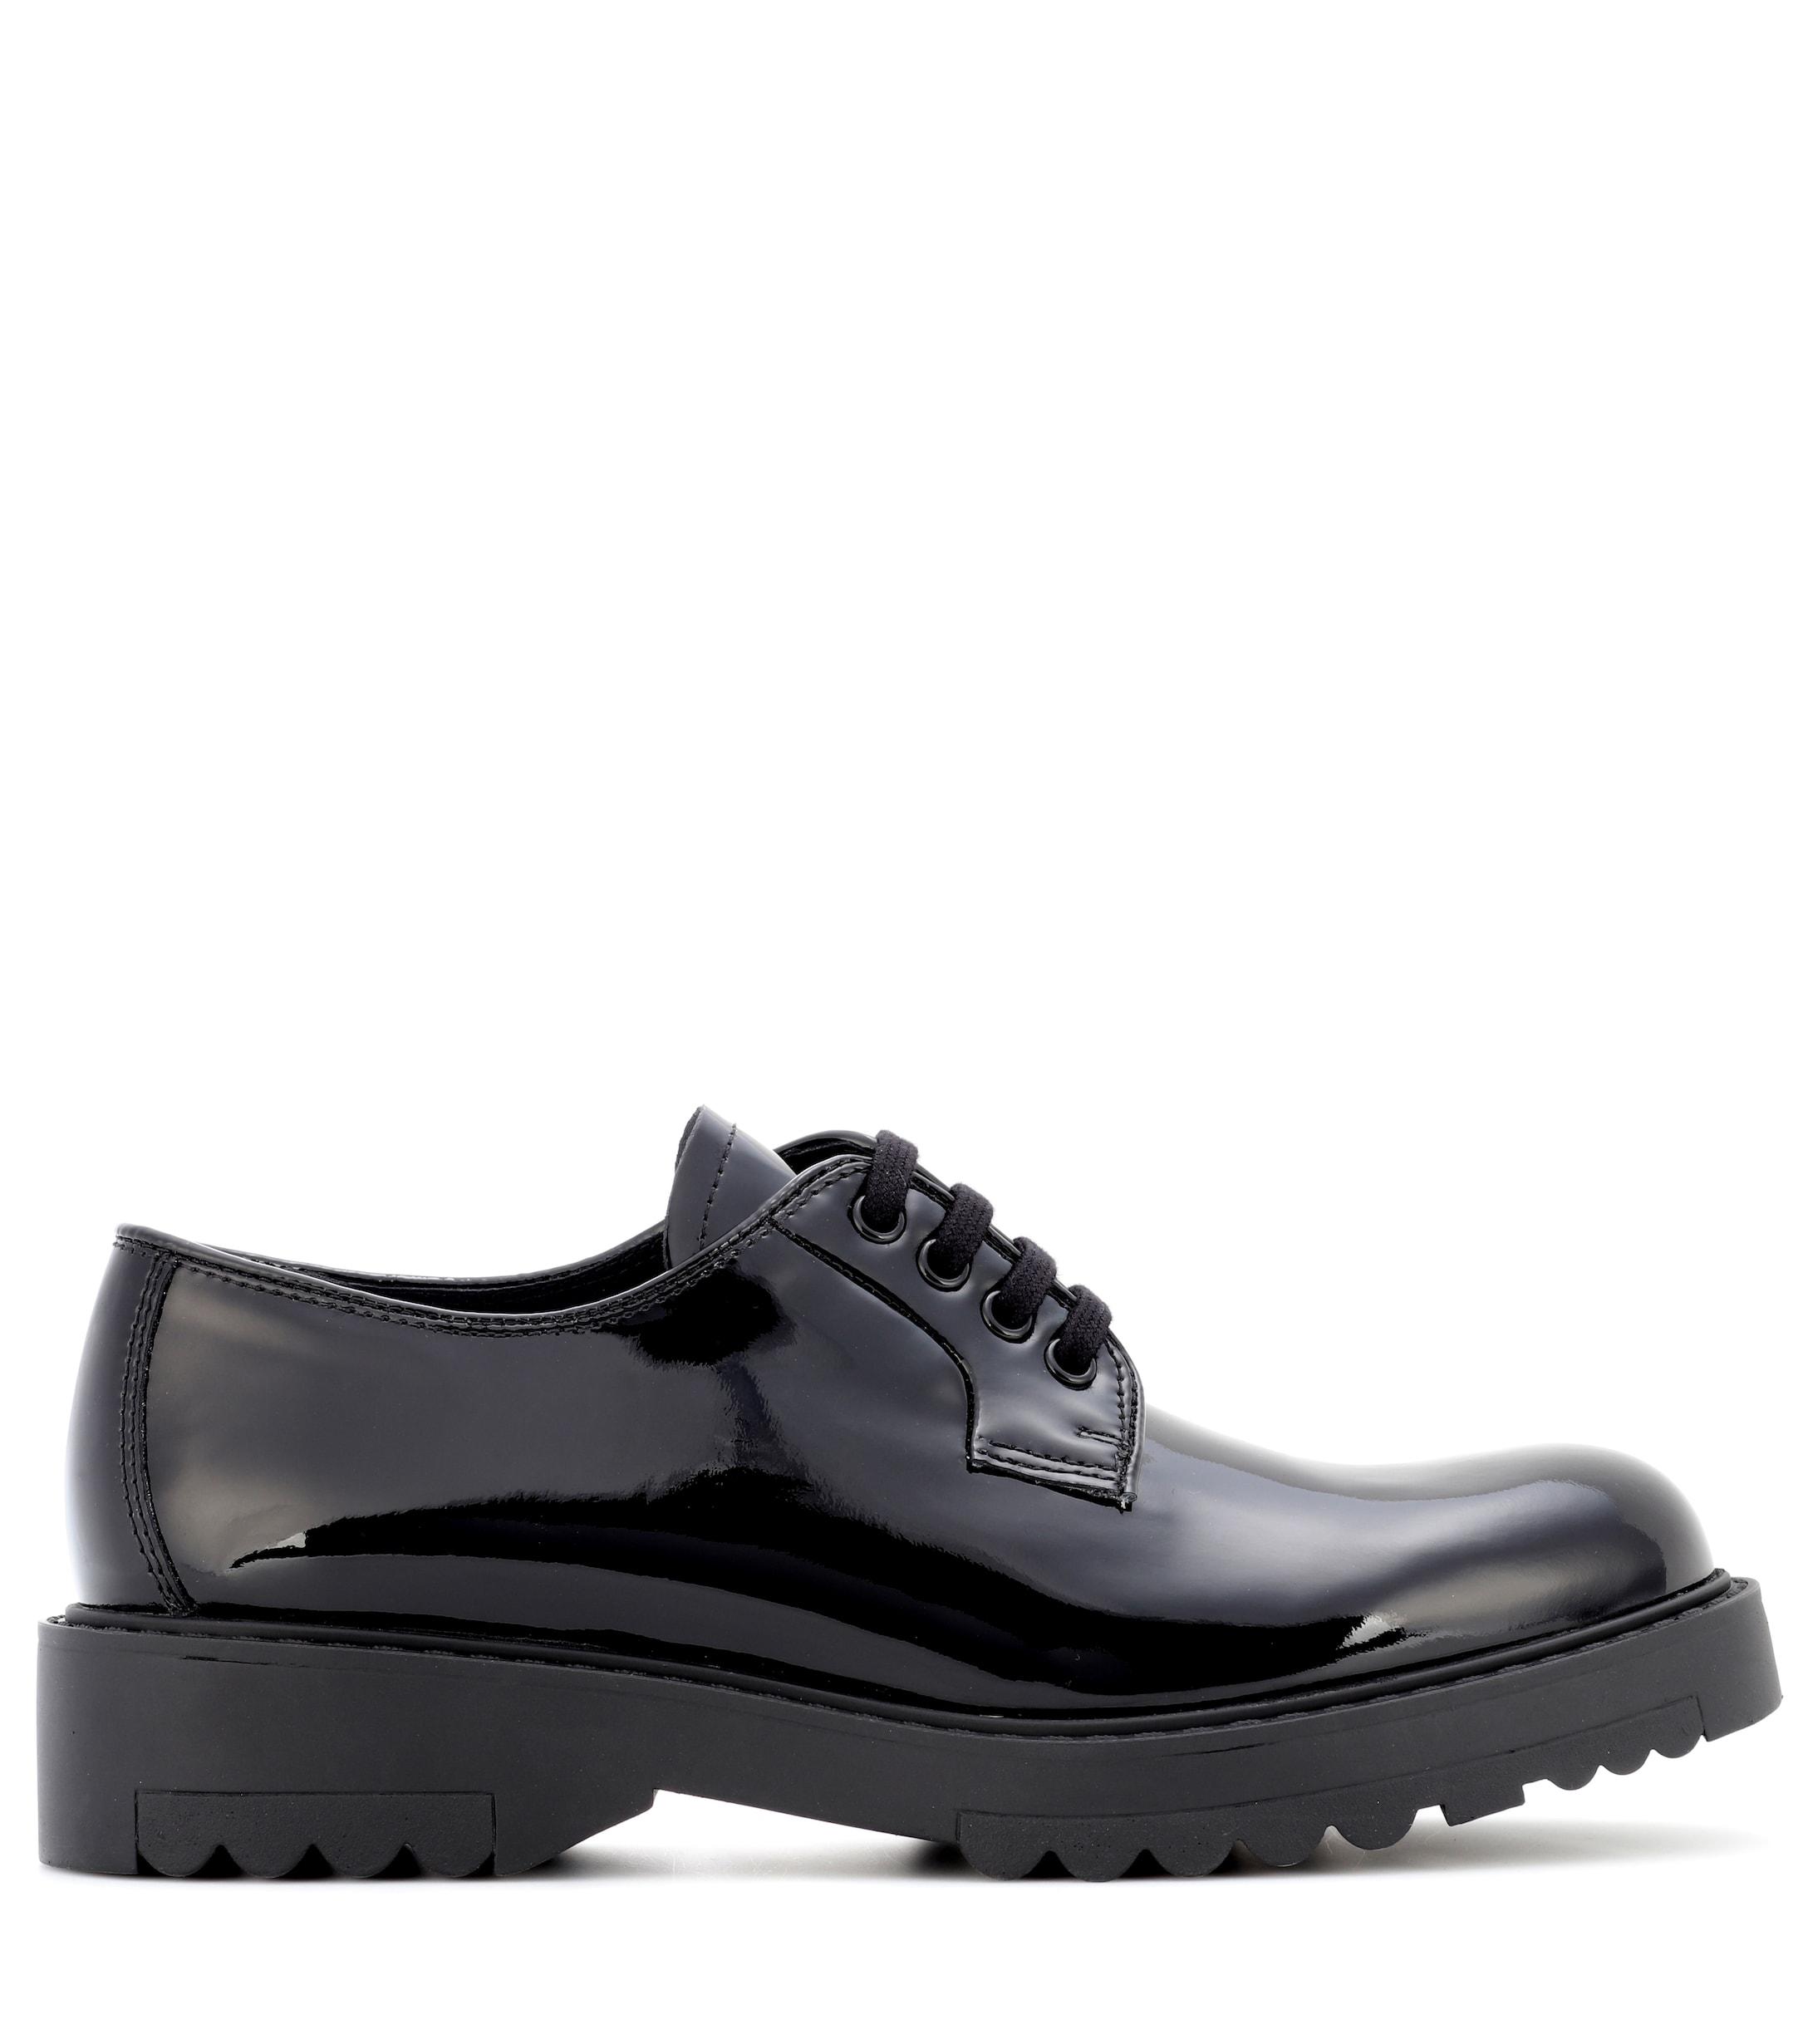 Prada Derby Patent Leather Shoes in Black - Lyst